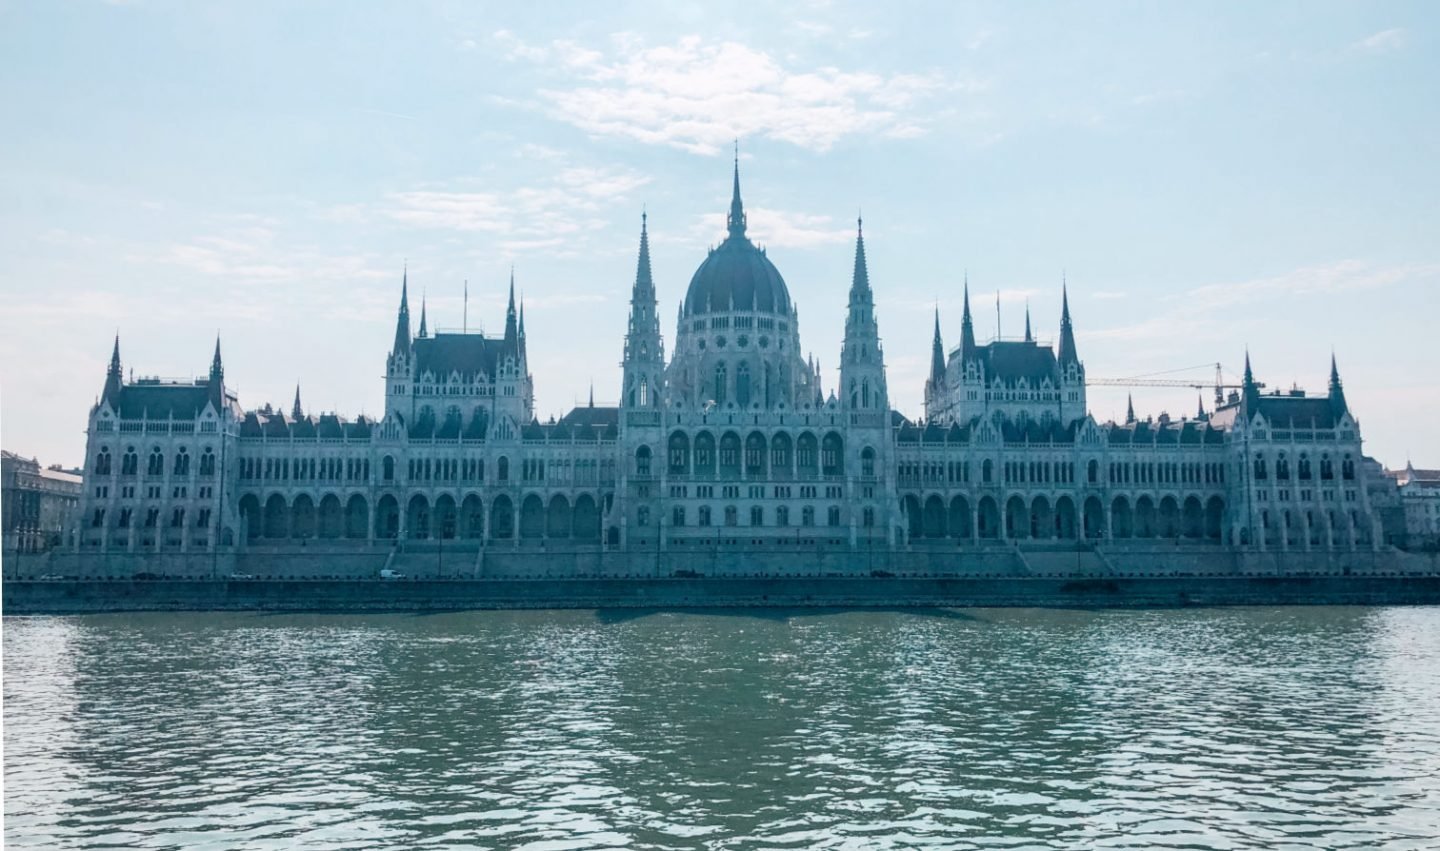 Budapest Parliament from the River Danube